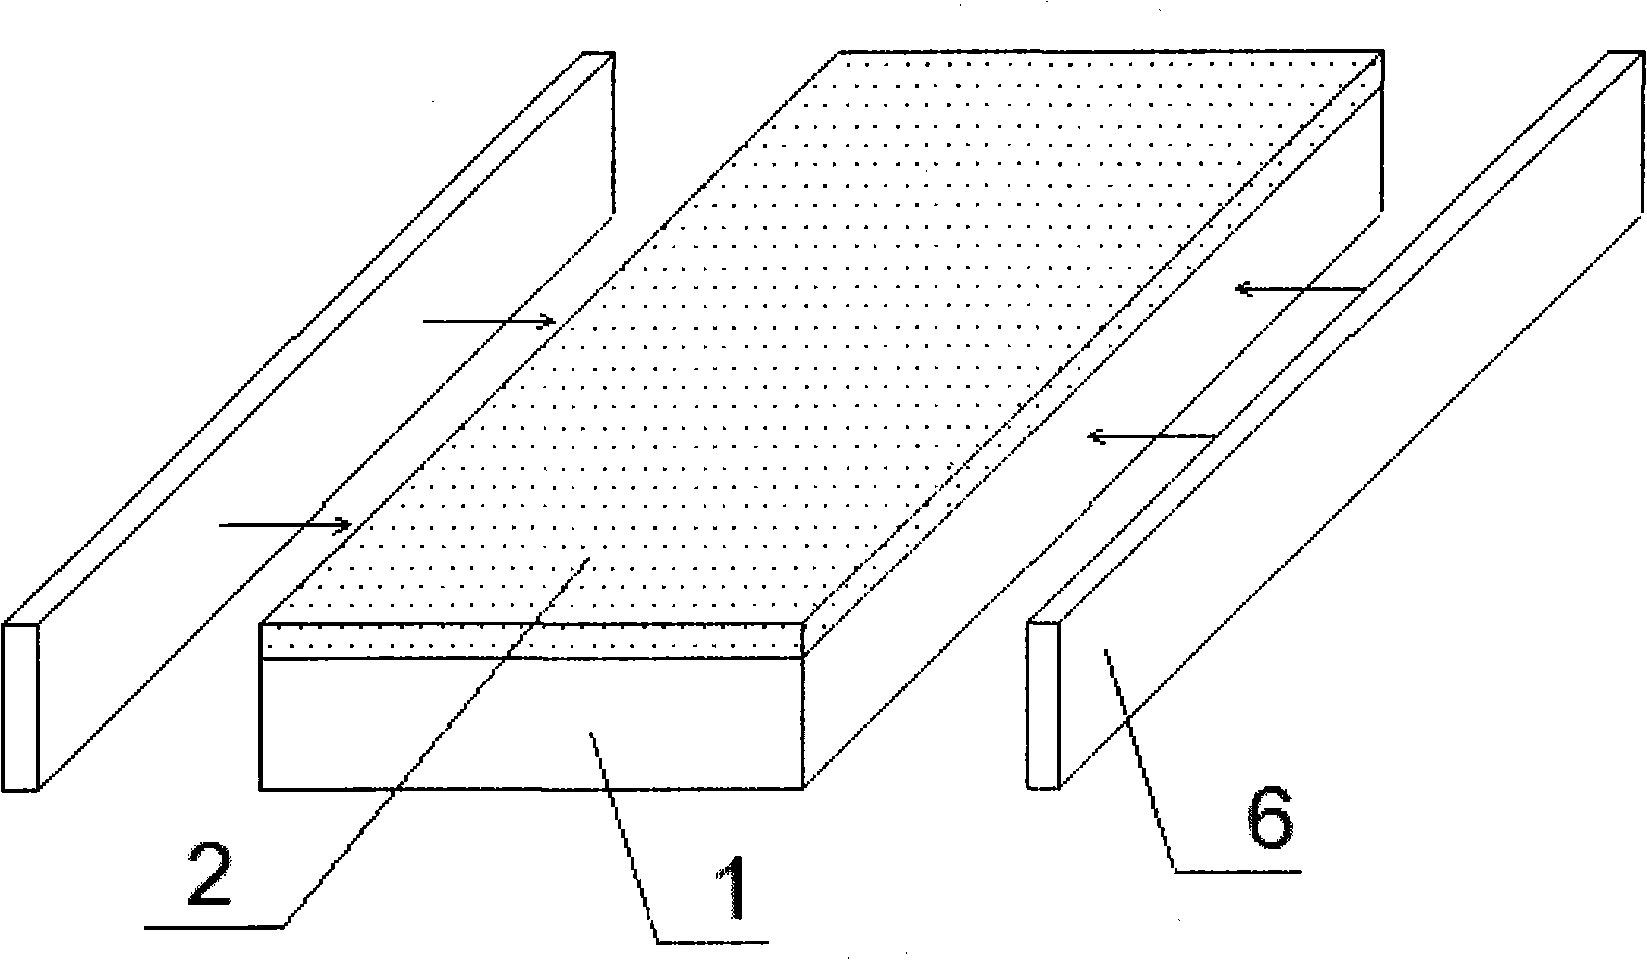 Light guide body covered with optical membrane